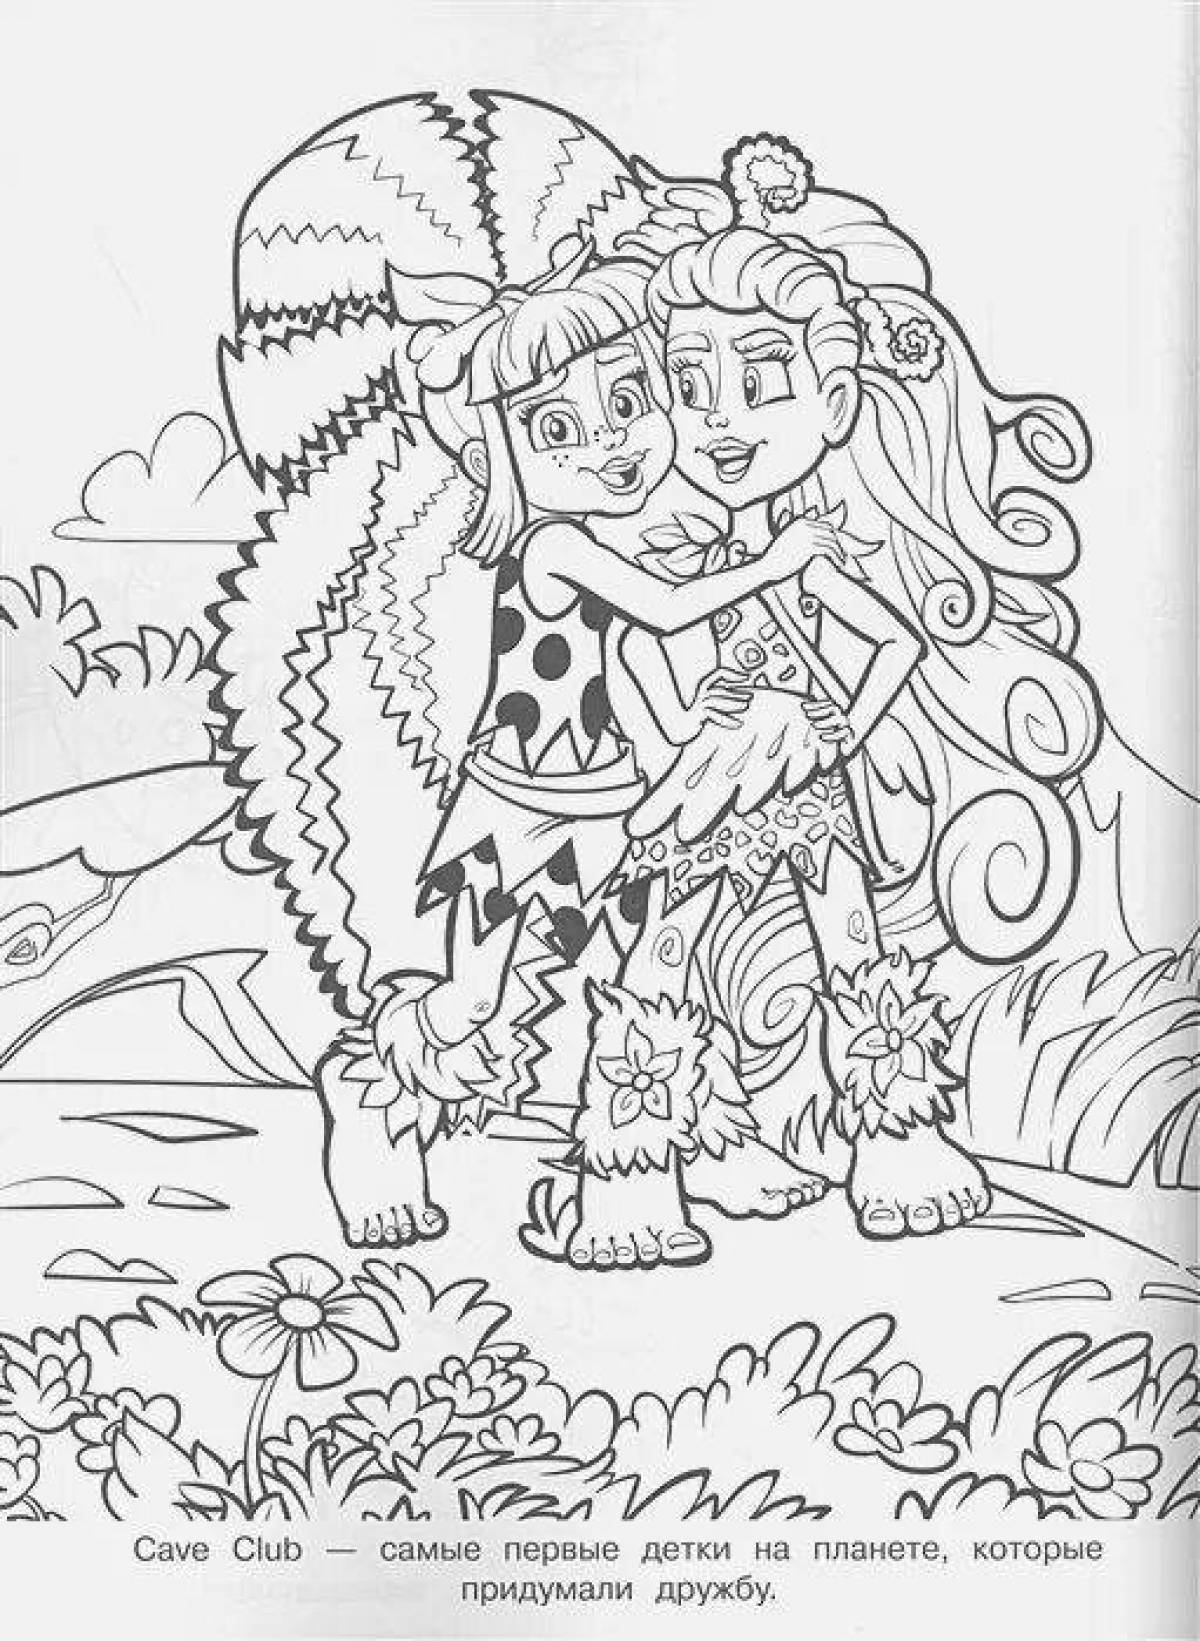 Colourful cave club coloring page